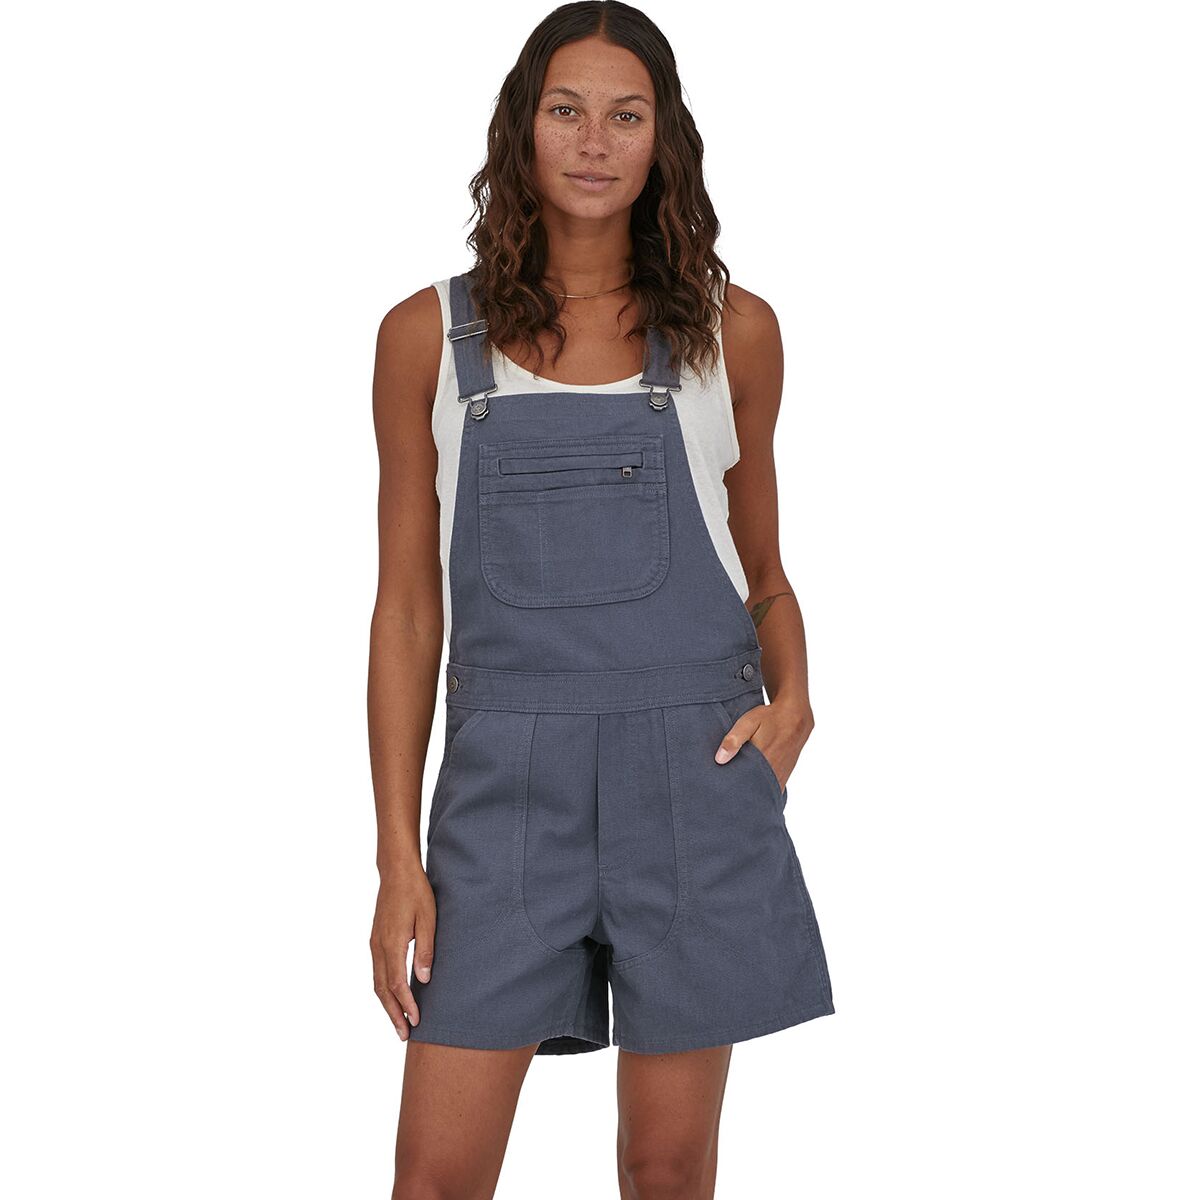 Patagonia Stand Up Overall - Women's